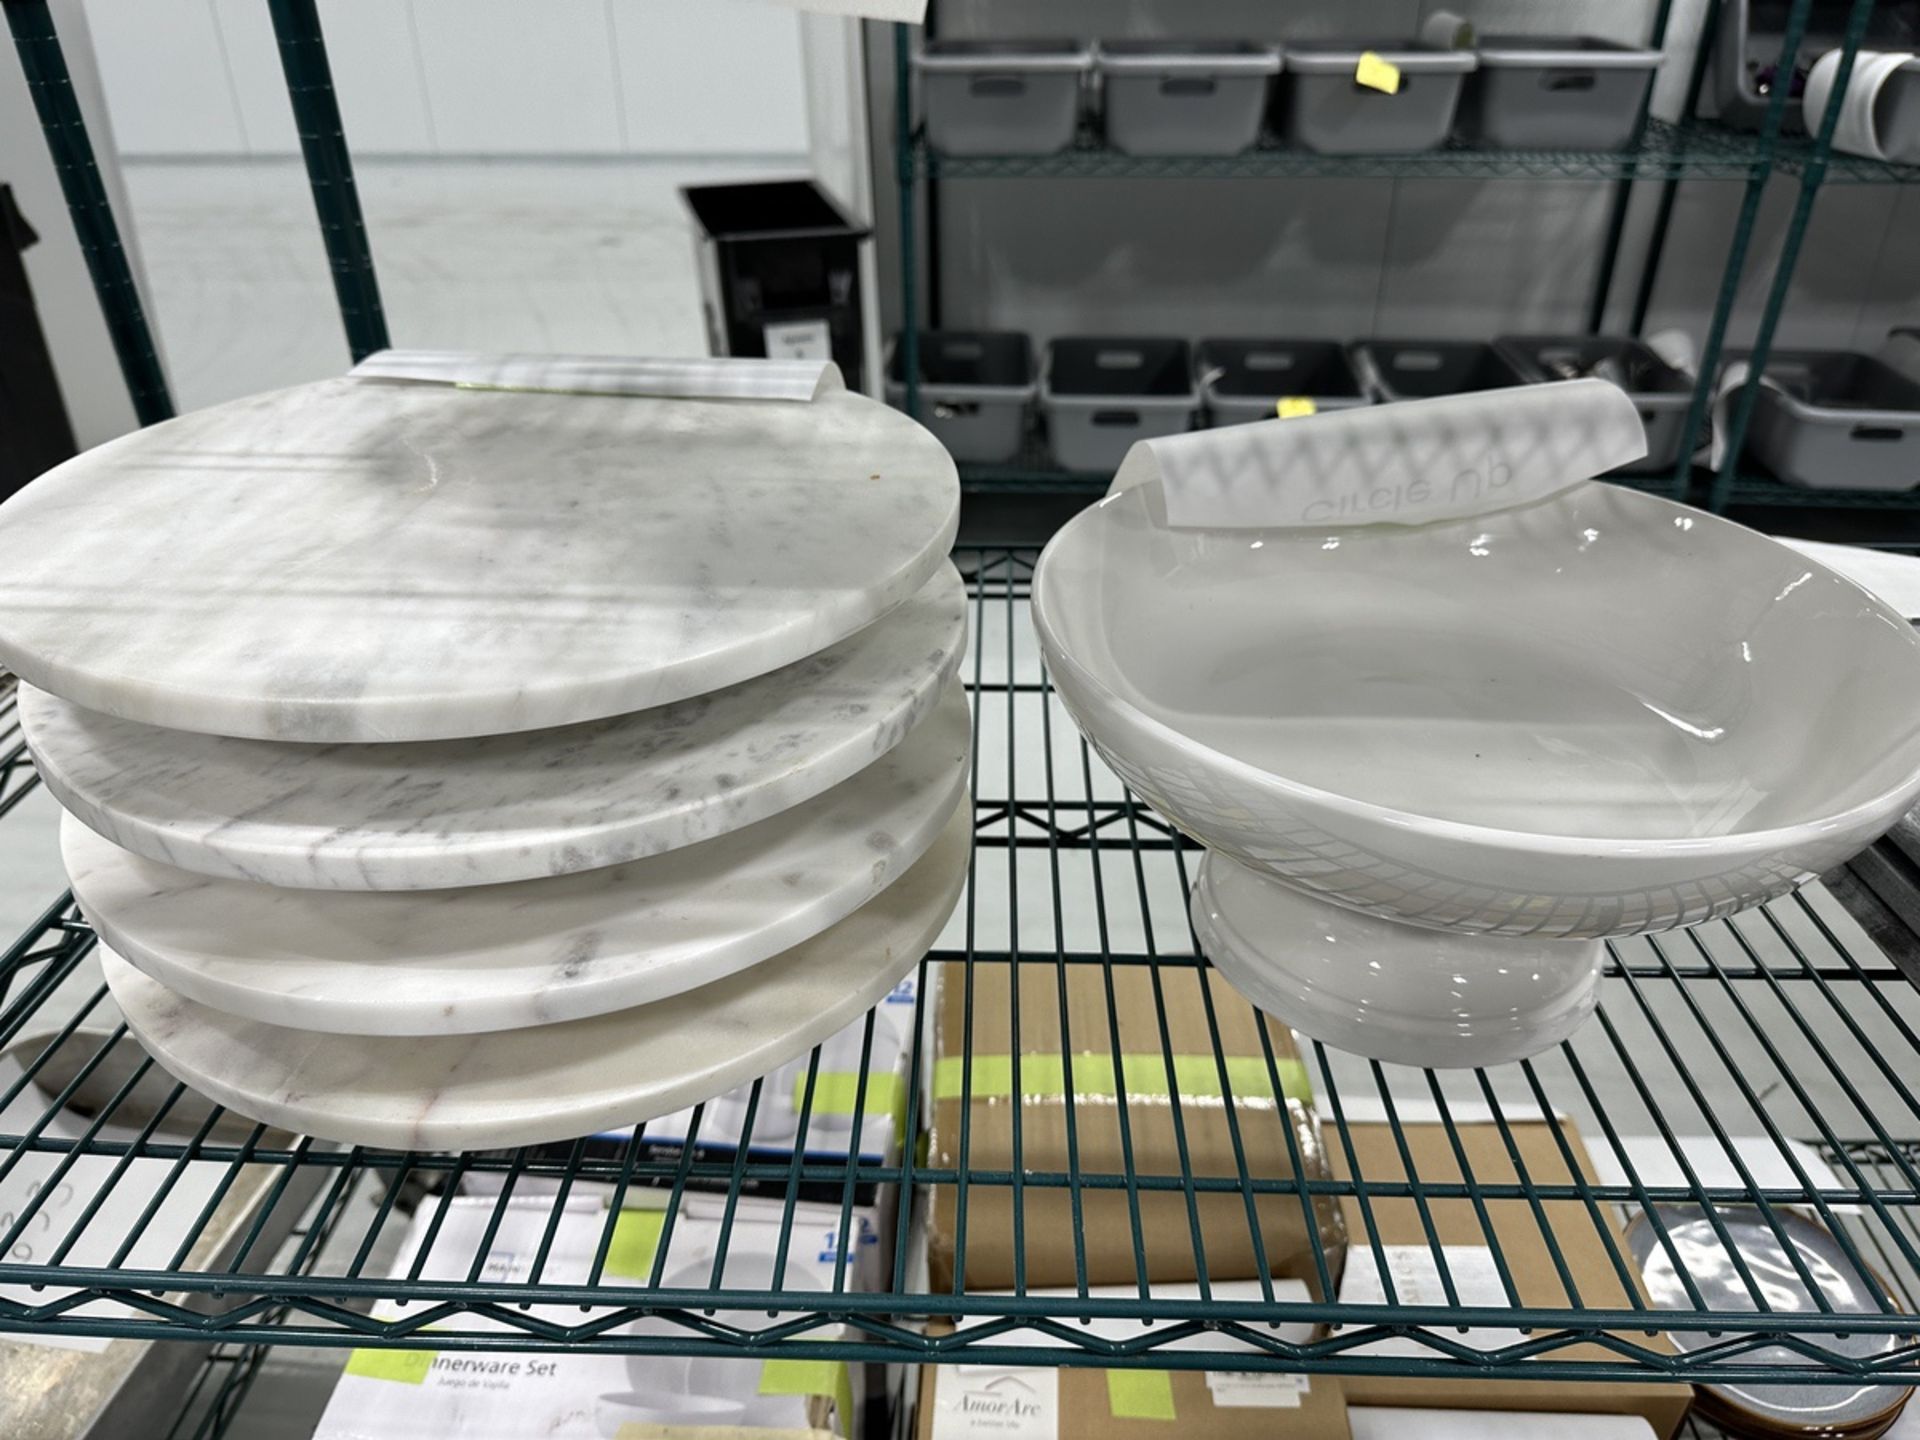 LOT Asst. Marble Lazy Susans, Cutting Trays, Bowls, Porcelain Plates on (2) Shelves | Rig Fee $75 - Image 2 of 5